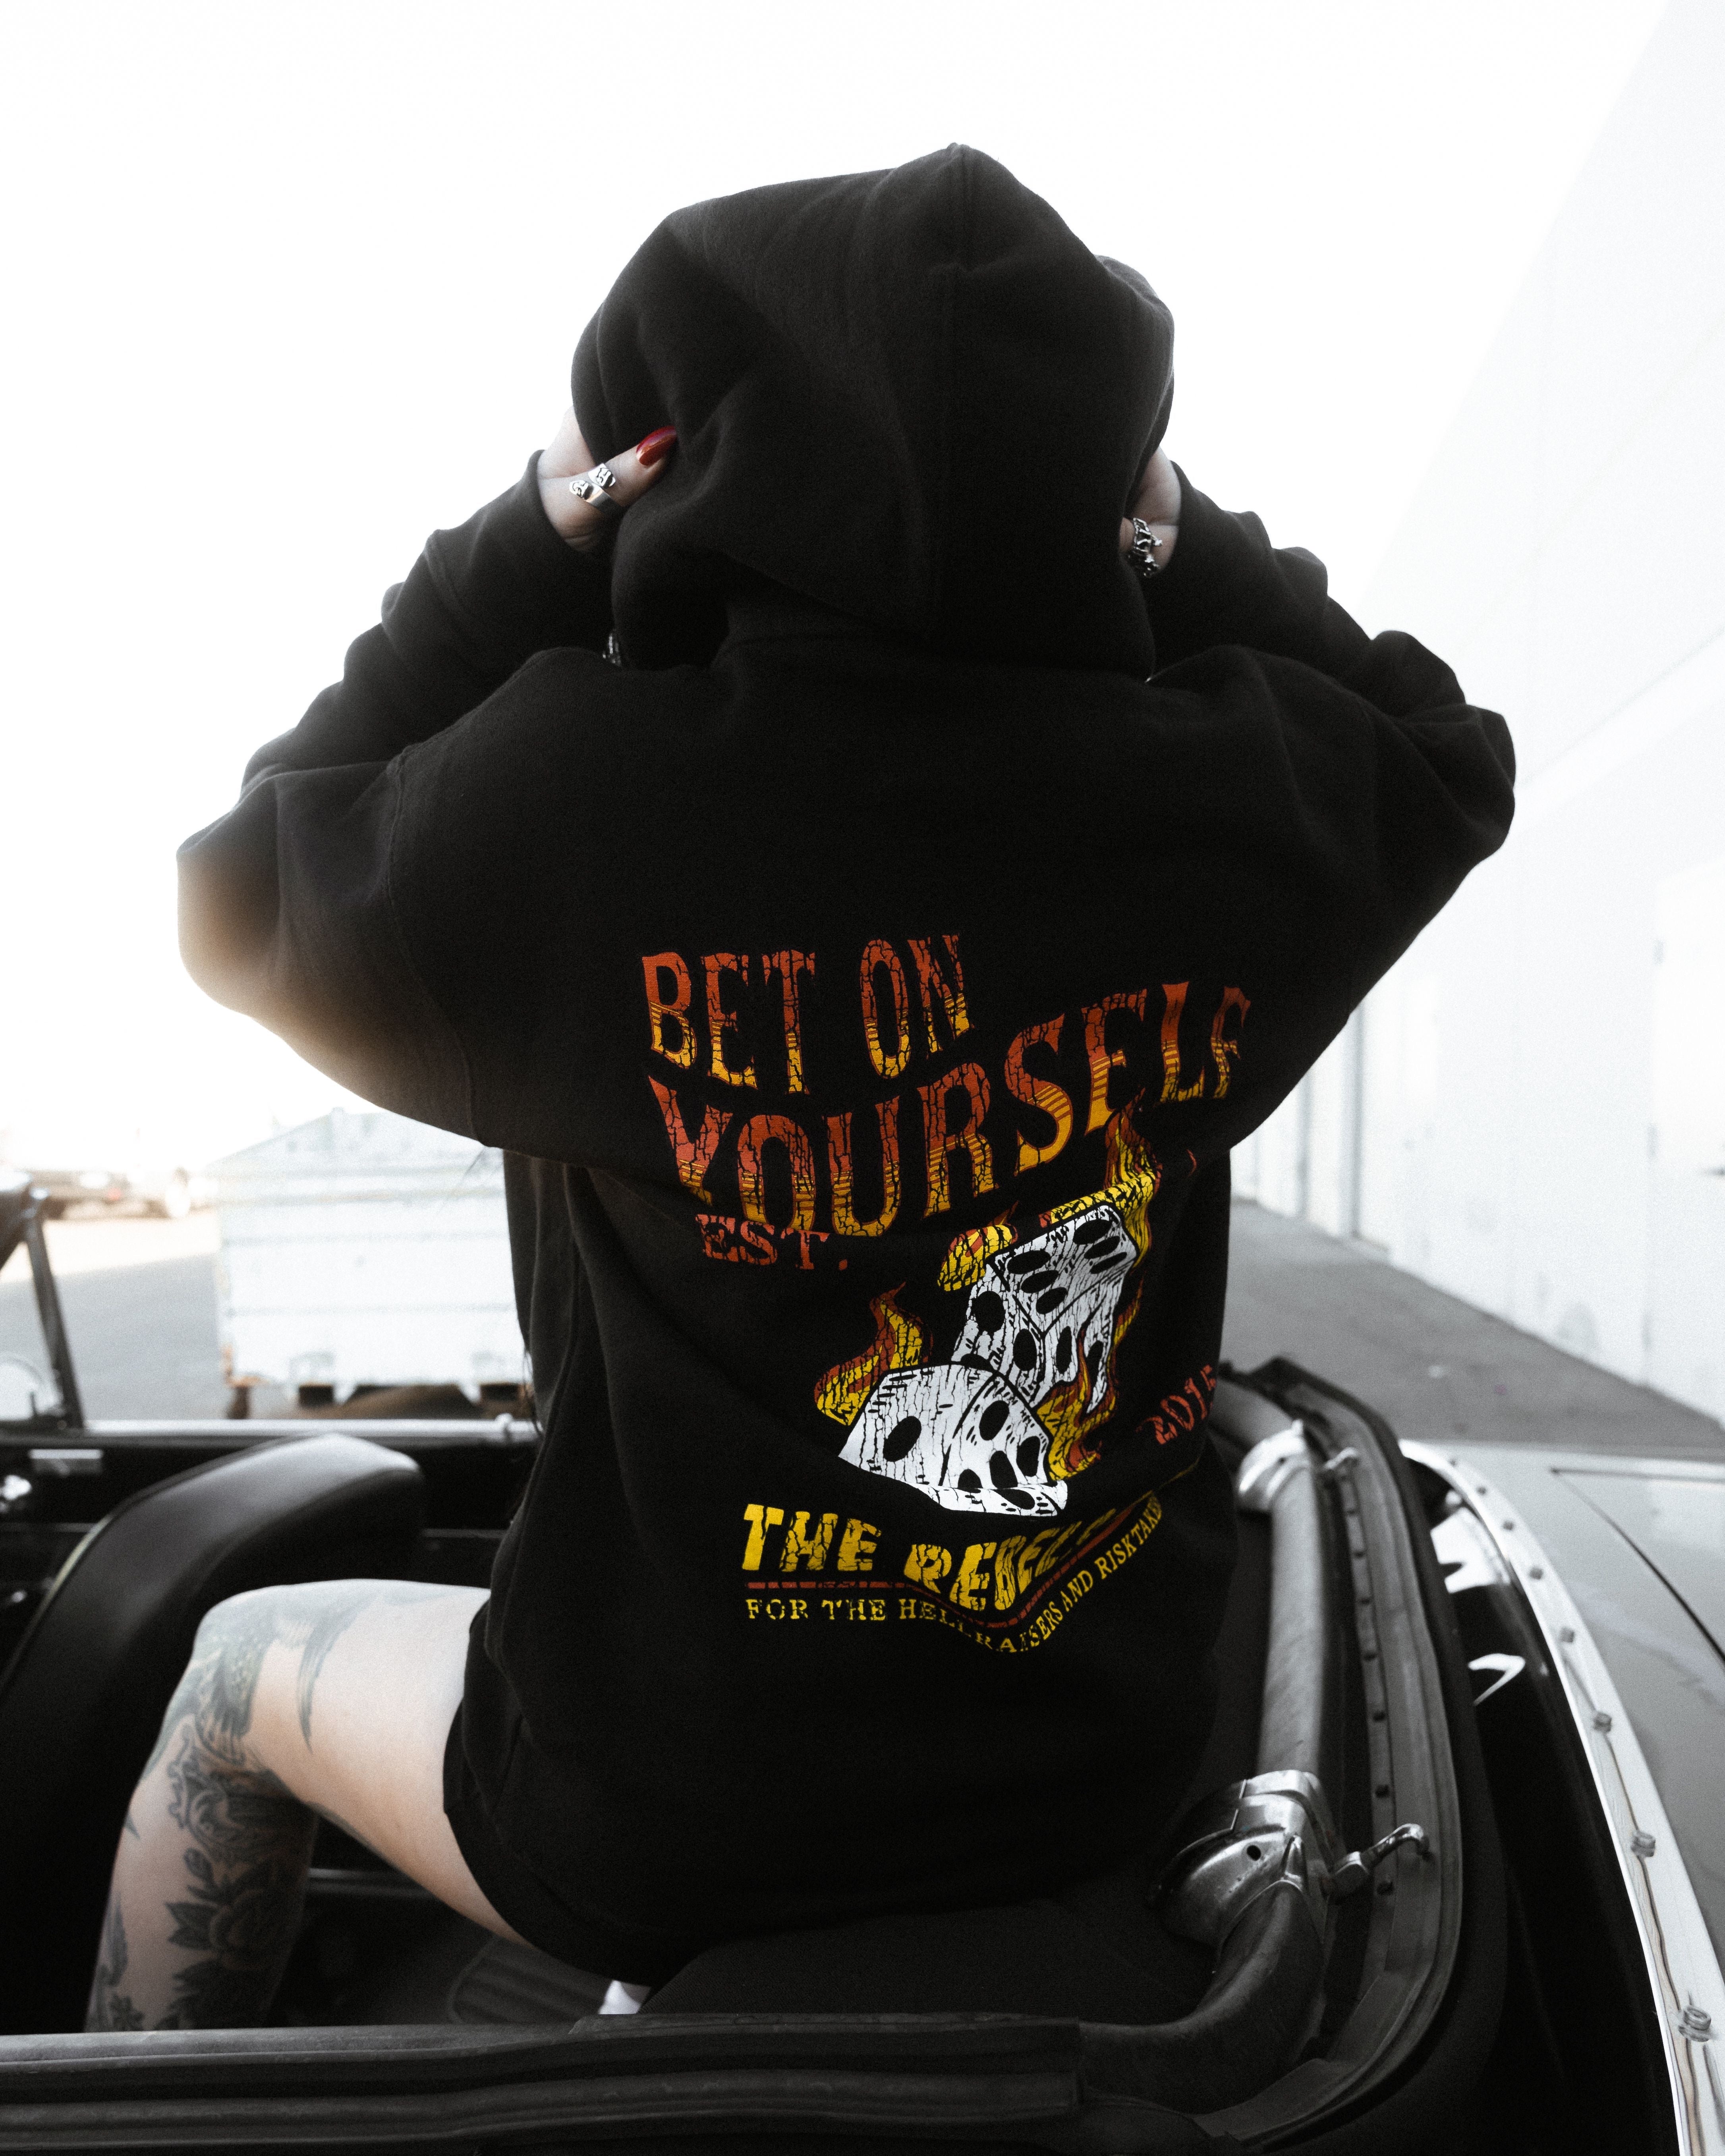 Bet On Yourself Hoodie